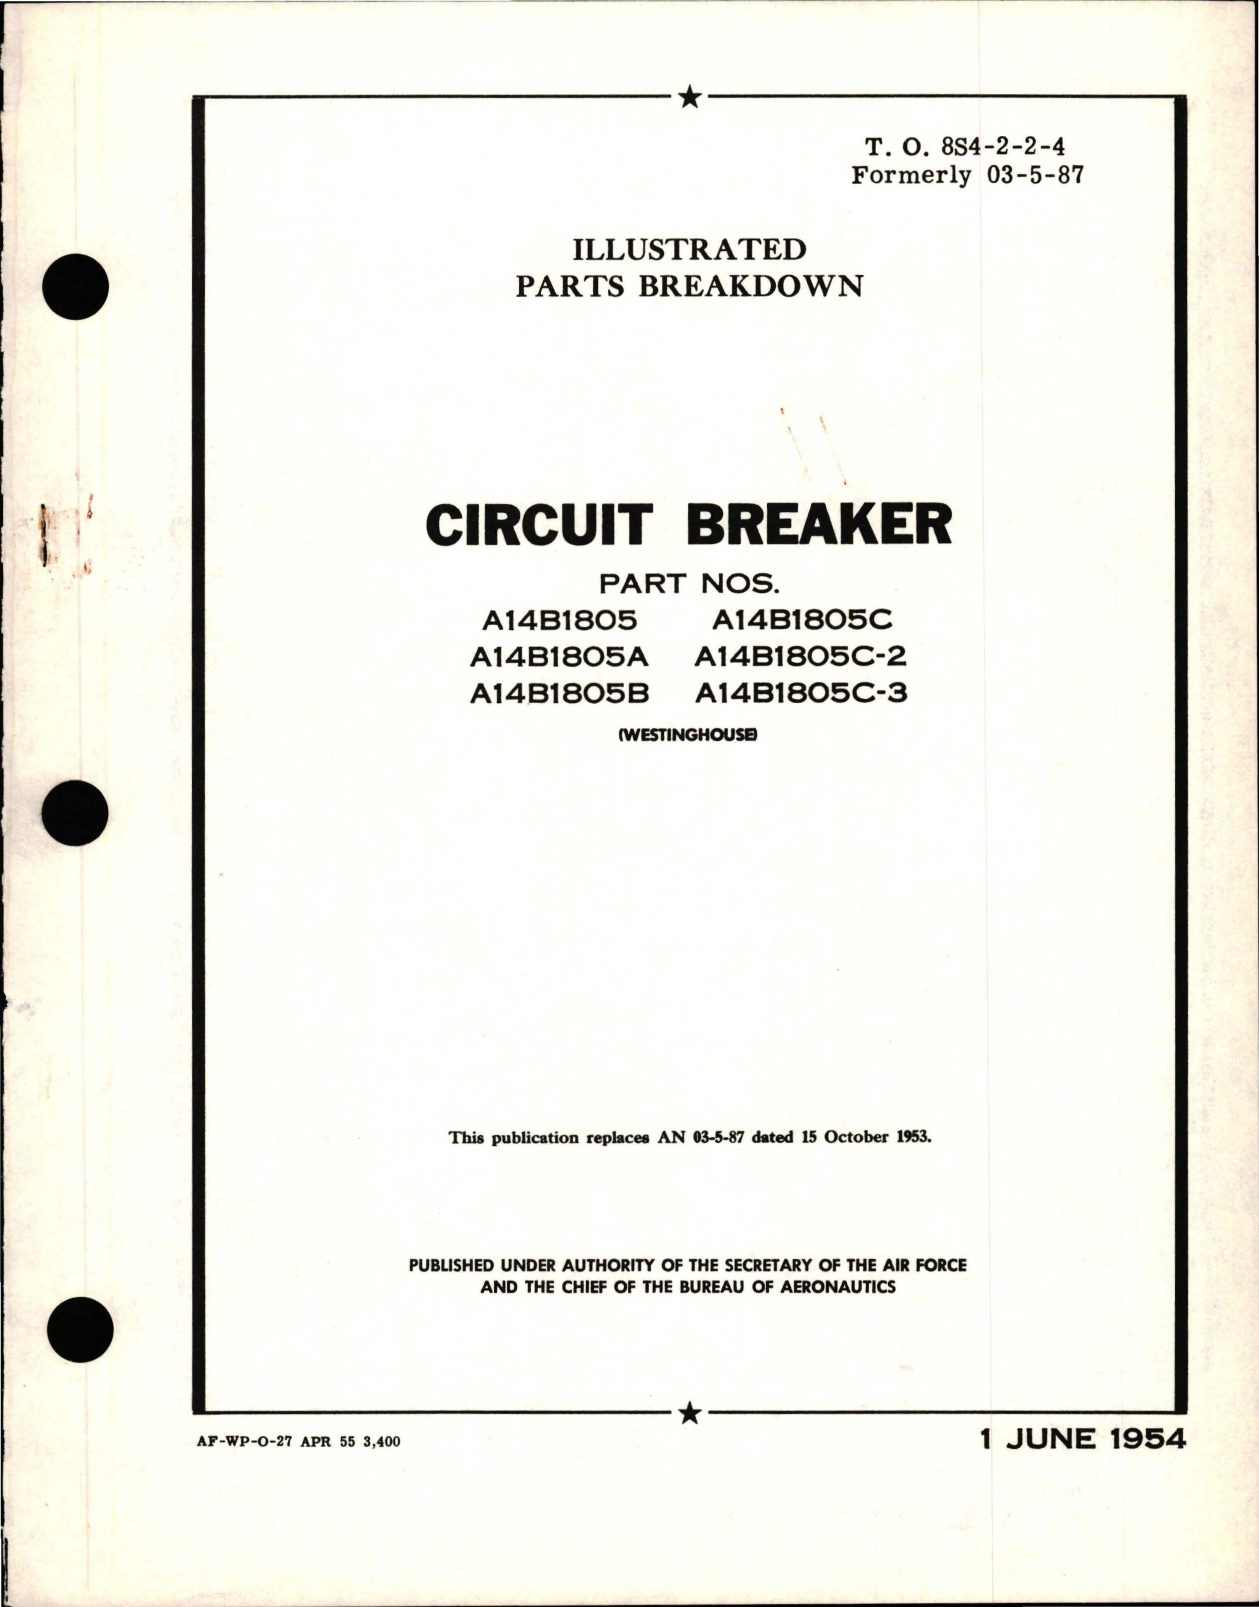 Sample page 1 from AirCorps Library document: Illustrated Parts Breakdown for Circuit Breaker  - Parts A14B1805, A14B1805A, A14B1805B, A14B1805C, A14B1805C-2, and A14B1805C-3